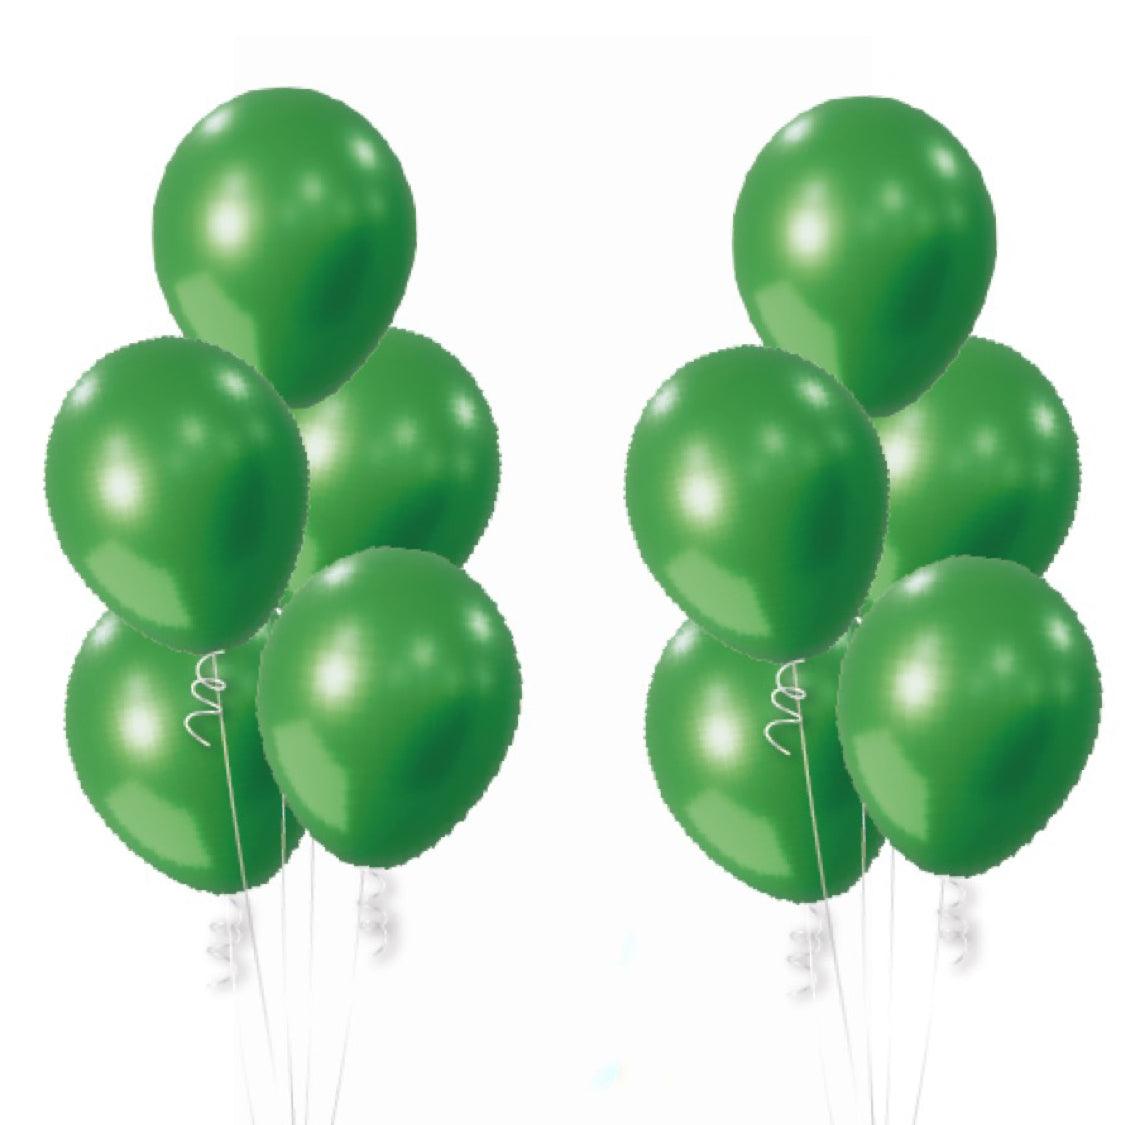 Chrome green jungle balloon 2 bouquets of 5 - ONE UP BALLOONS